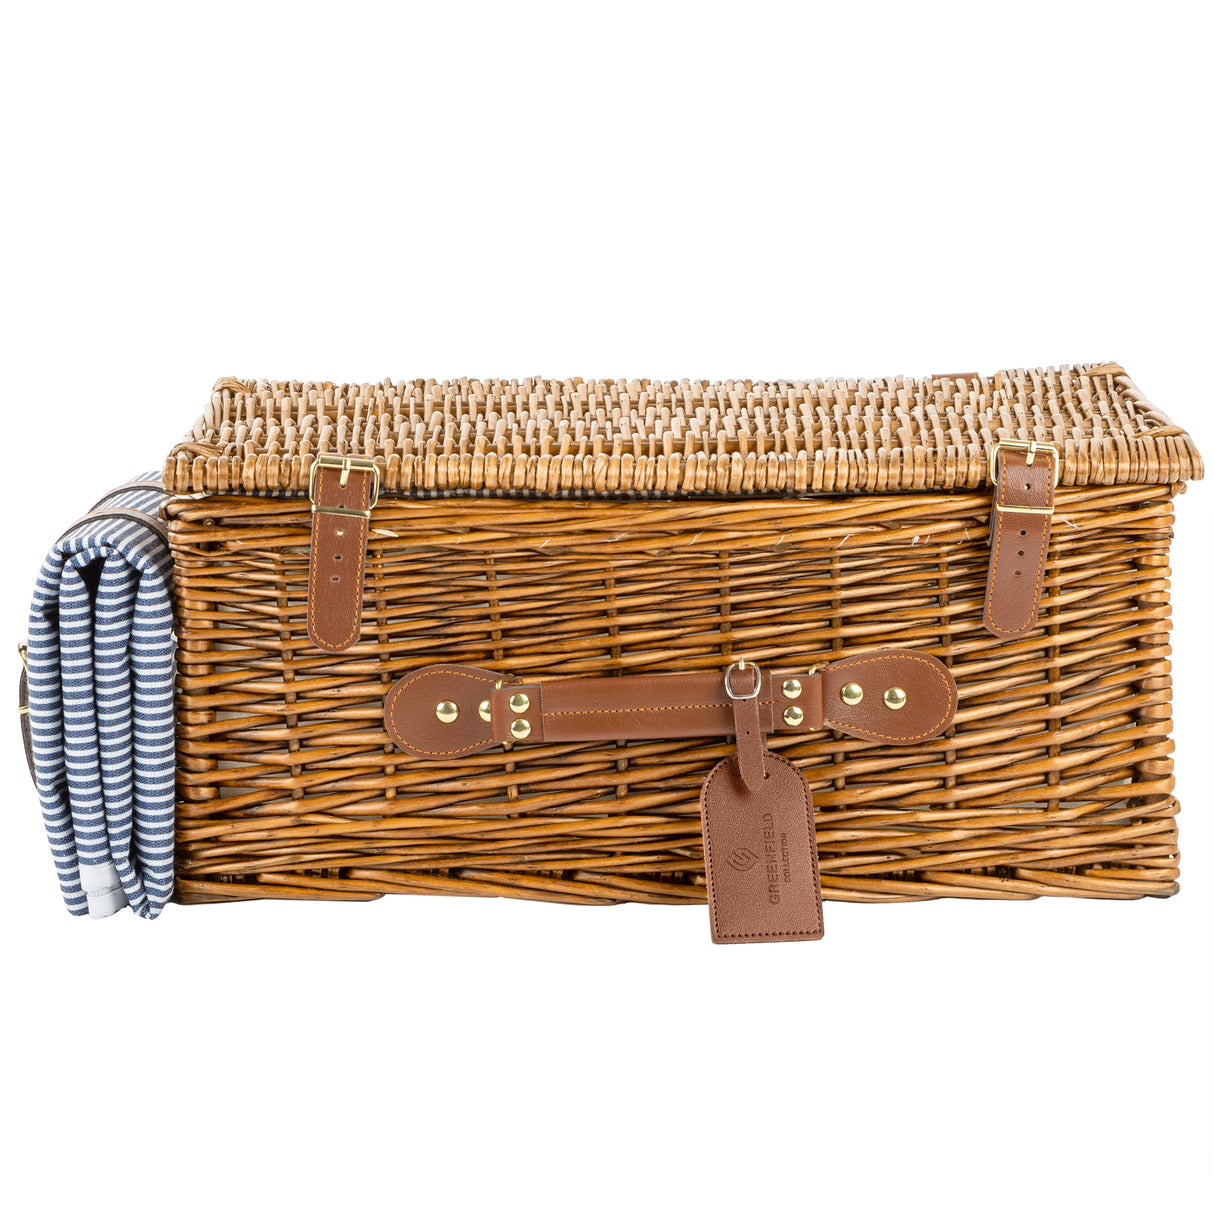 Abbotsbury Willow Picnic Basket Hamper with Picnic Blanket - The Greenfield Collection